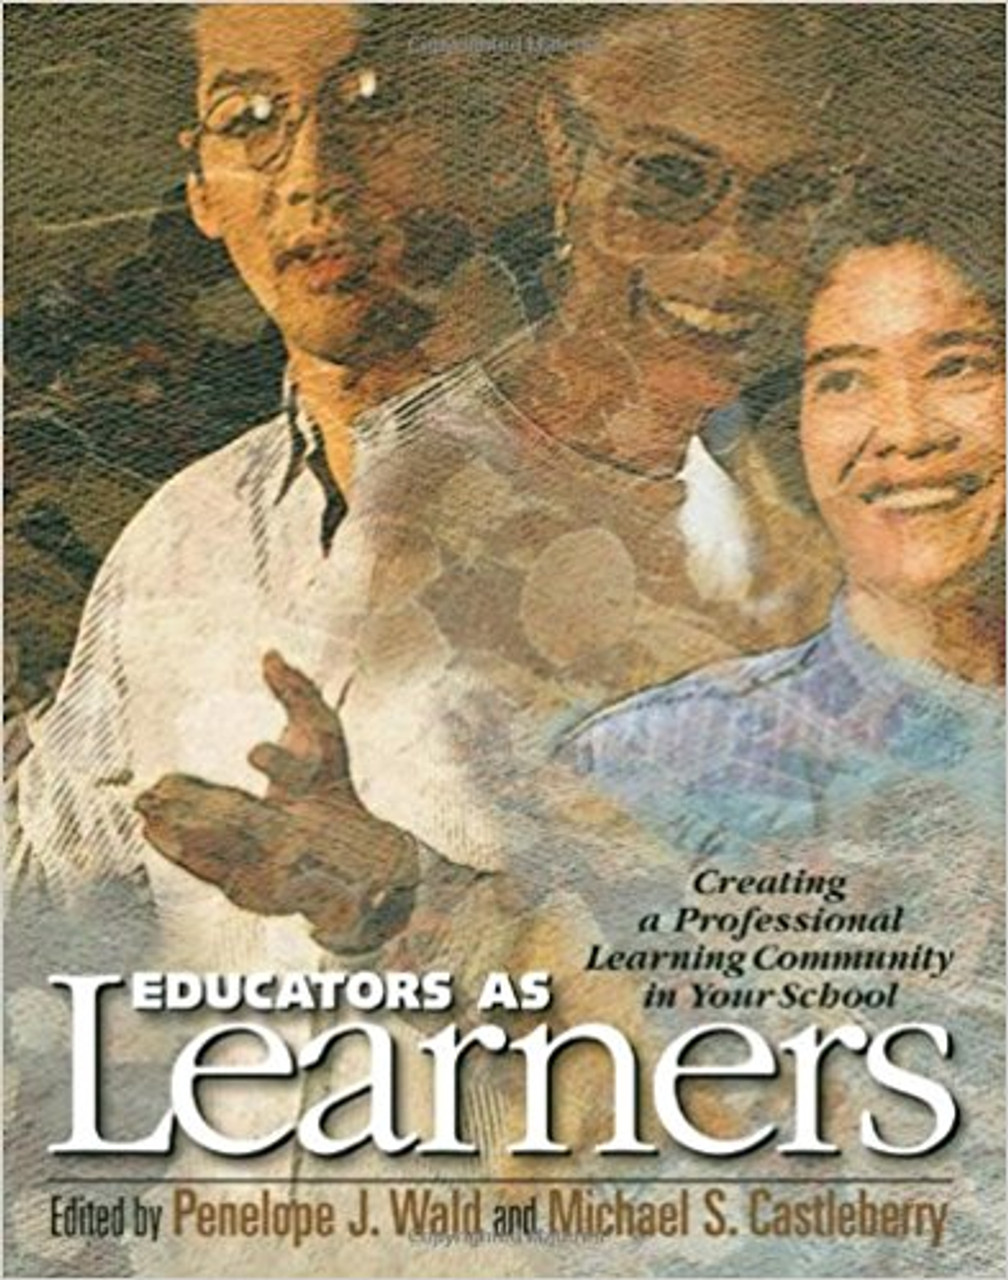 How can schools develop a shared vision that embraces the aspiration of all members of the school community? How can members of a learning community work together to build the knowledge and processes needed for student success? This book describes a professional development model that supports educators and families in learning and growing together. It offers a theoretical framework and practical guidance for renewing the capacity of schools to produce positive results for all children.